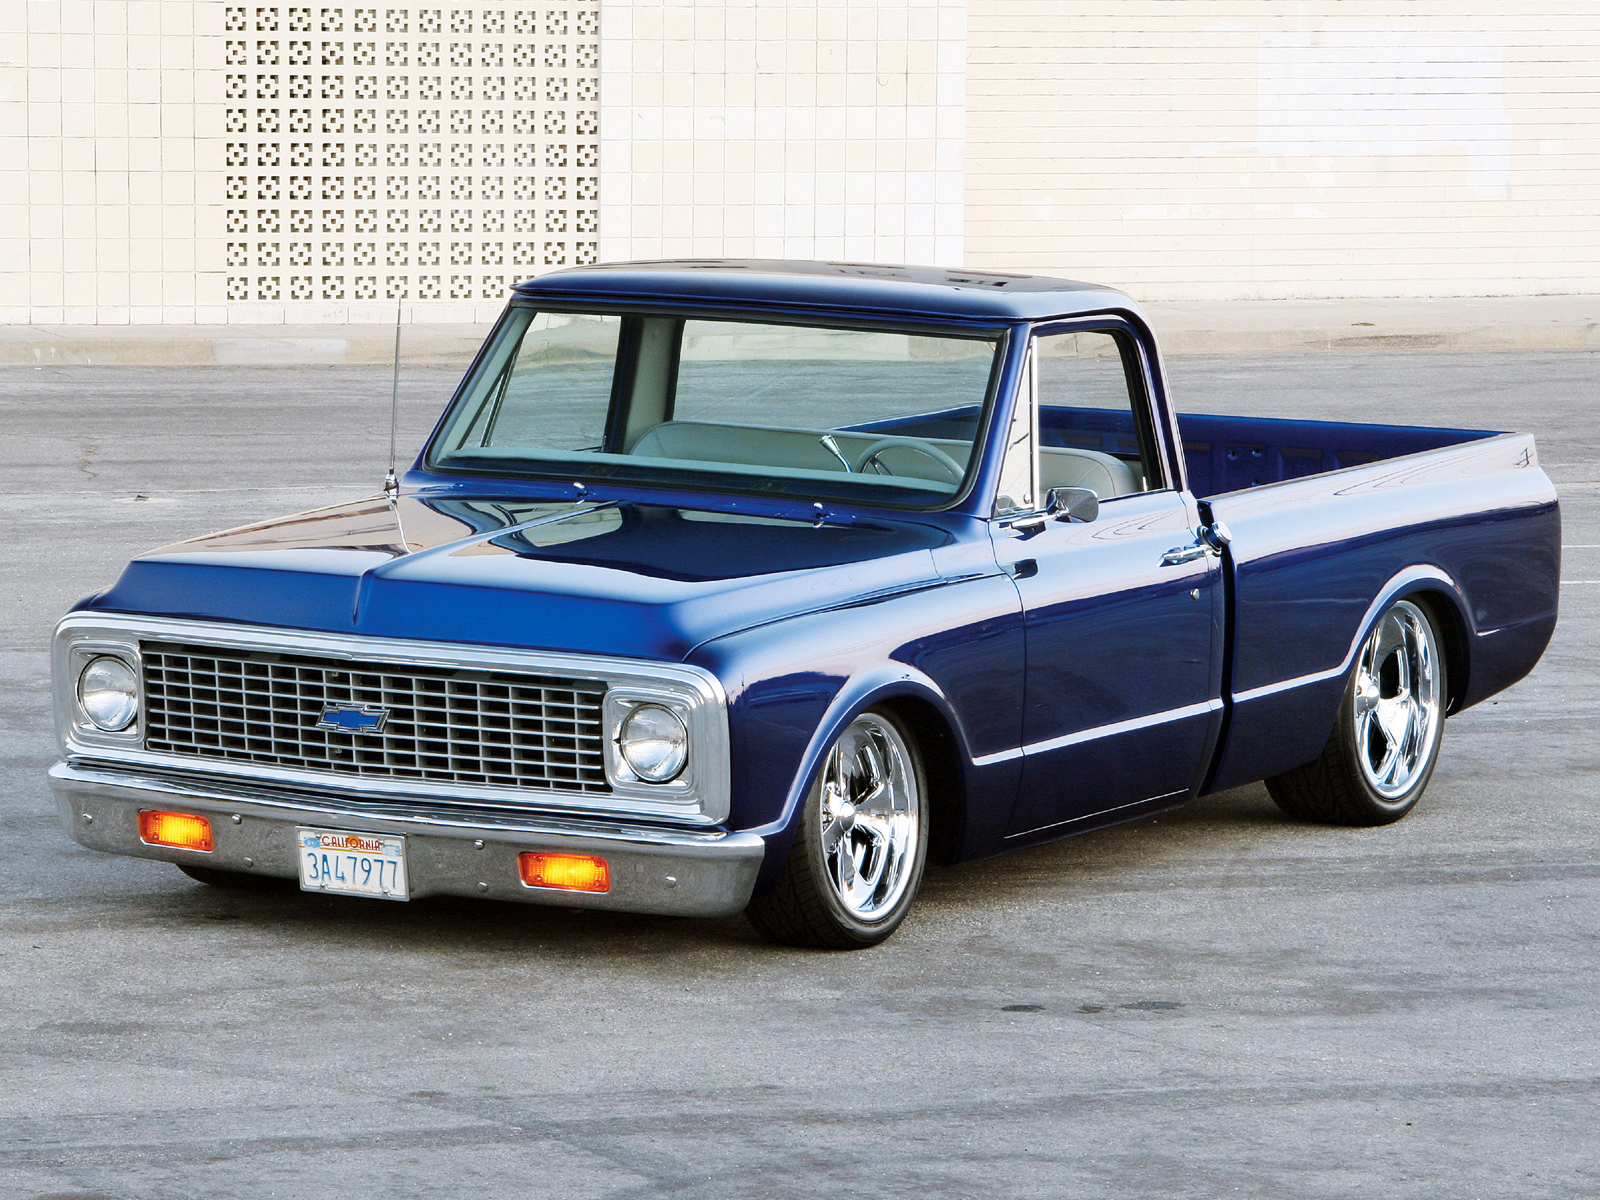 1972 Chevy C-10 pickup | Family Dro Project